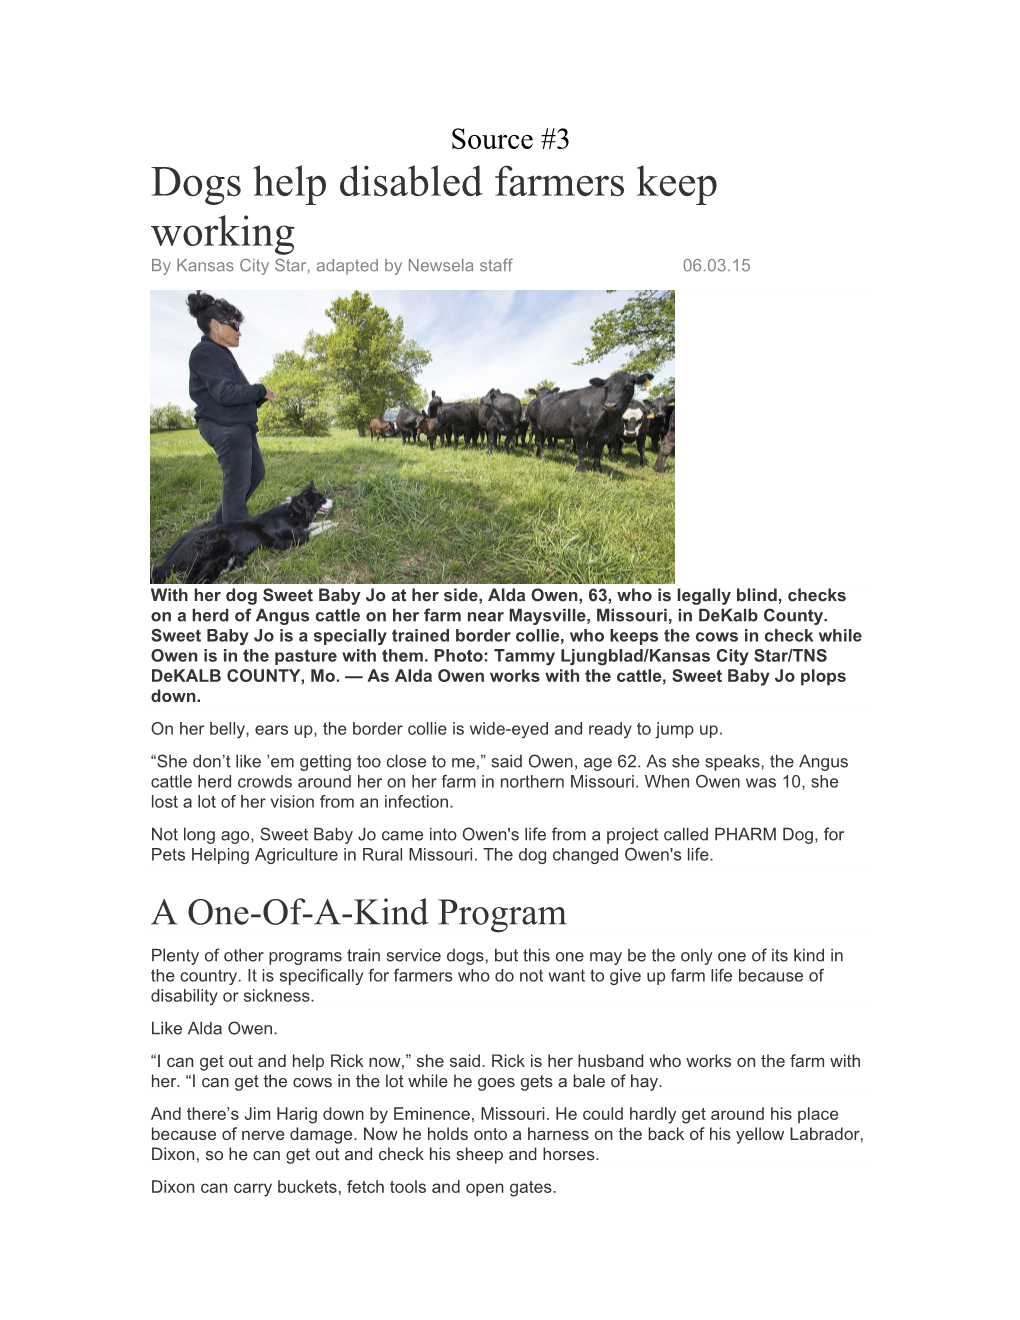 Dogs Help Disabled Farmers Keep Working